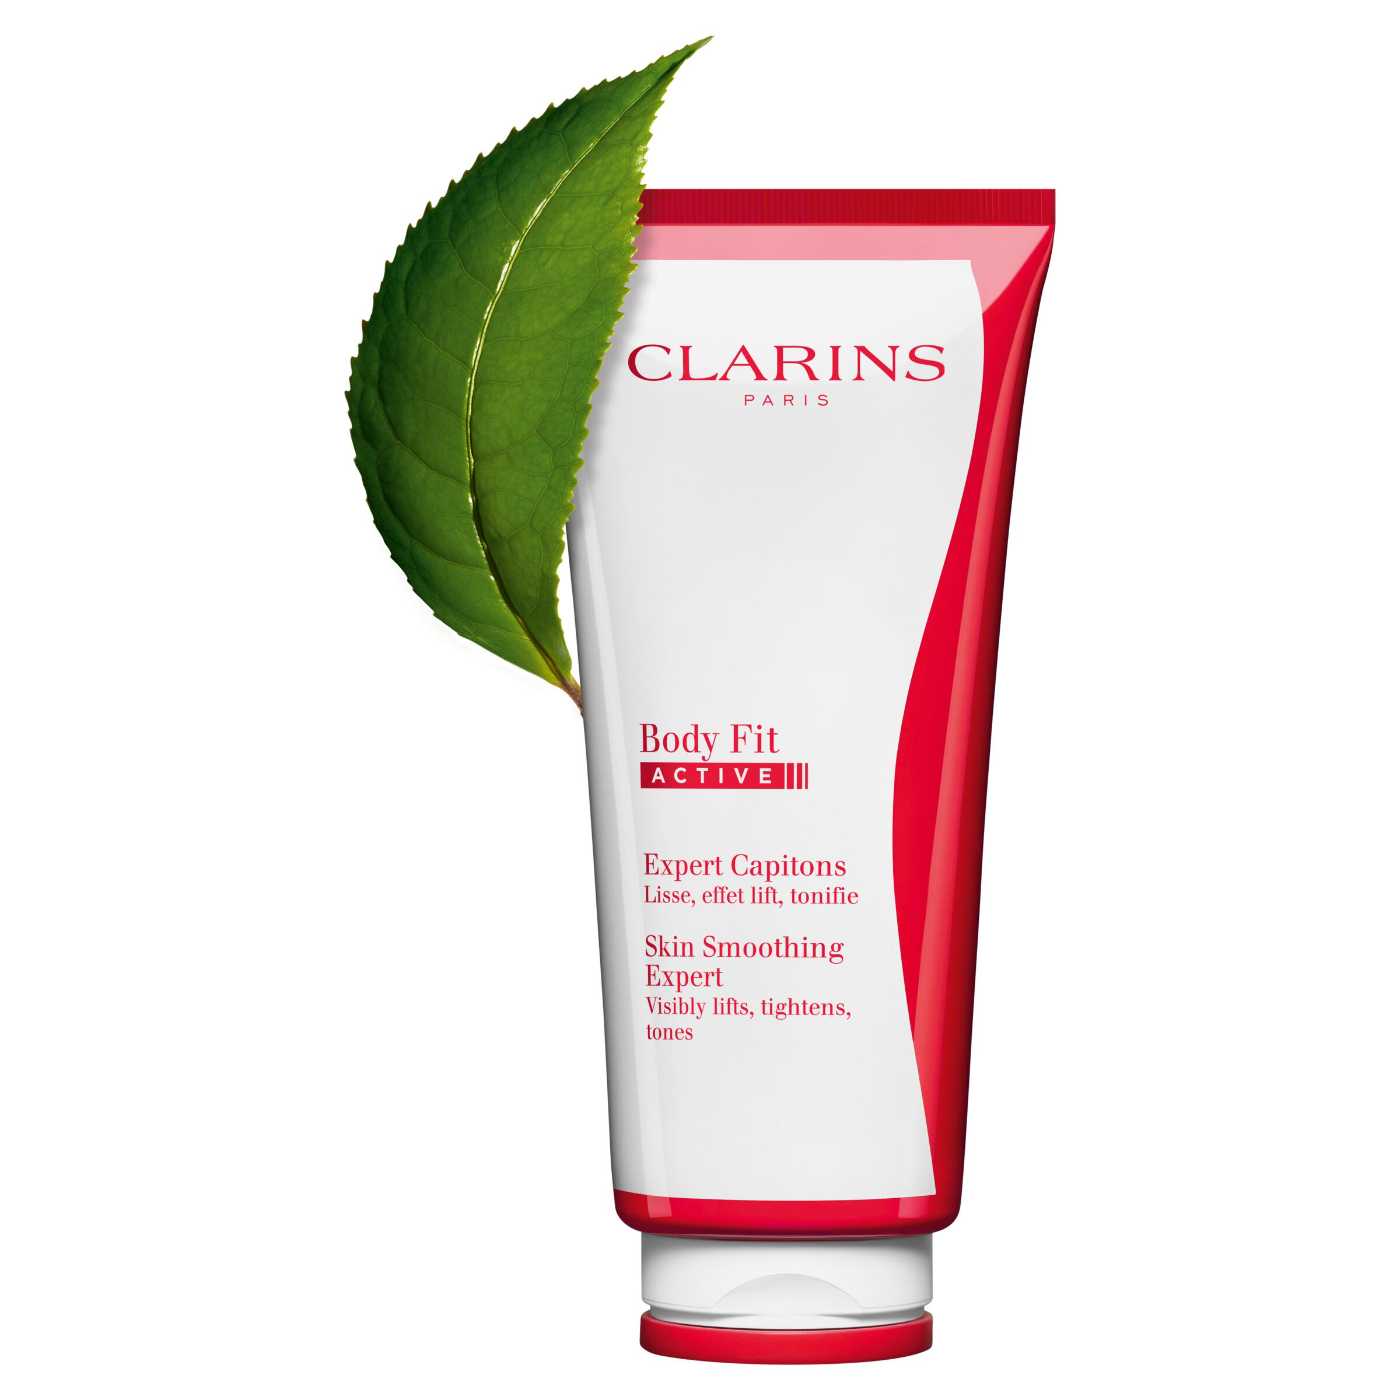 Of Toys and Co: Clarins Body Fit Anti-Cellulite Contouring Expert